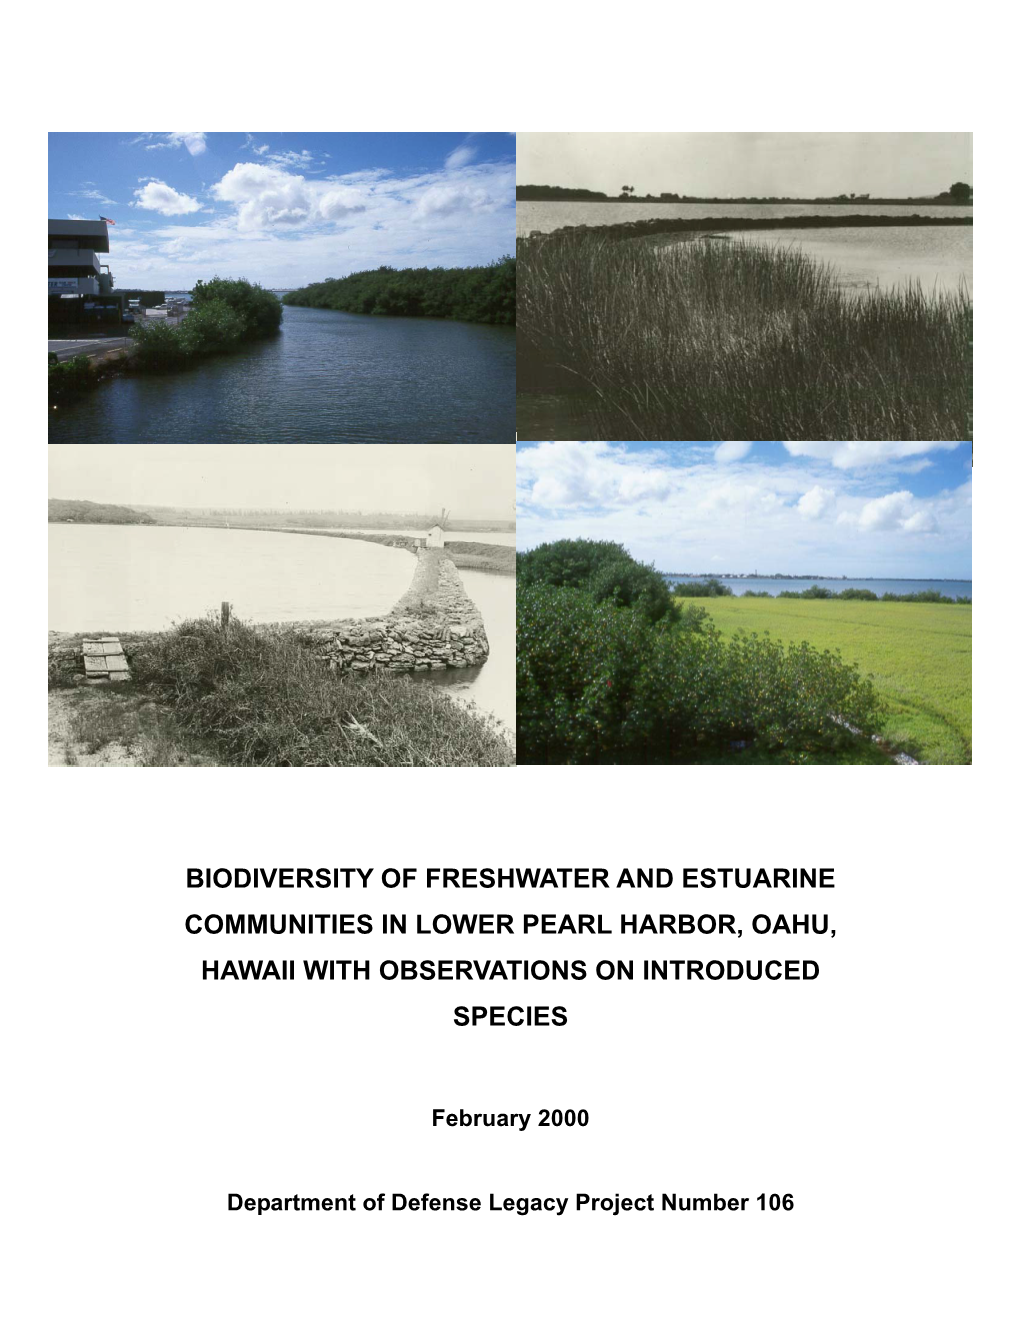 Biodiversity of Freshwater and Estuarine Communities in Lower Pearl Harbor, Oahu, Hawaii with Observations on Introduced Species